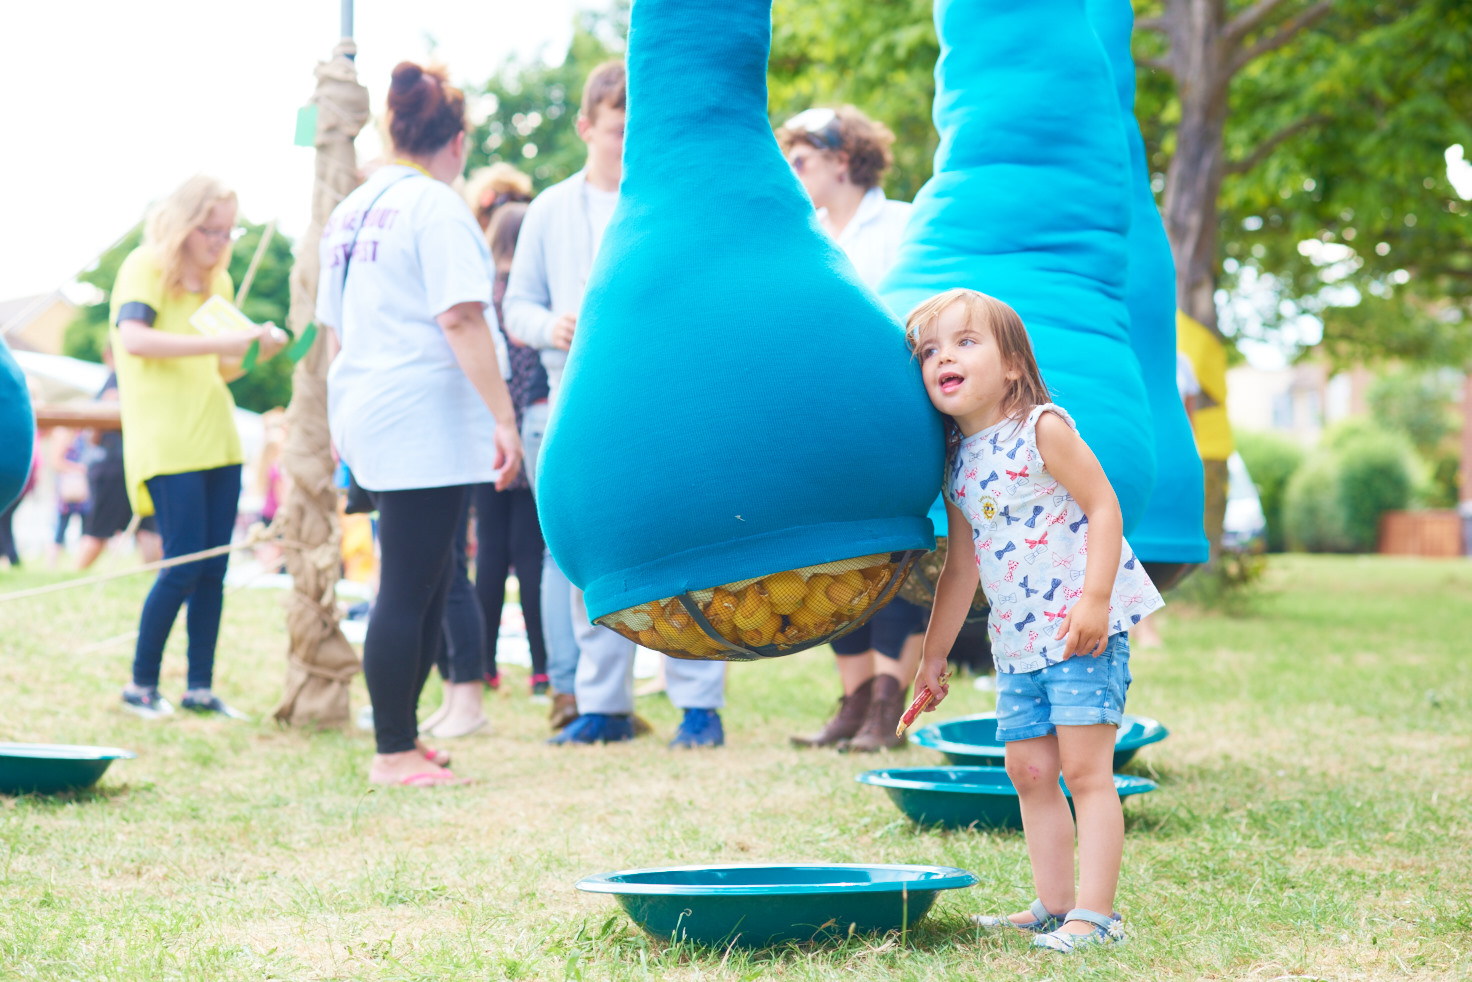 A photo showing an art installation on a green in front of a row of houses. The installation is large blue fabric tubes strung up about 2.5 metres in the air, with sections hanging down into large lumpy bulbs just off the ground.A young child is standing next to one of the bulbs with her head pressed against the blue fabric.